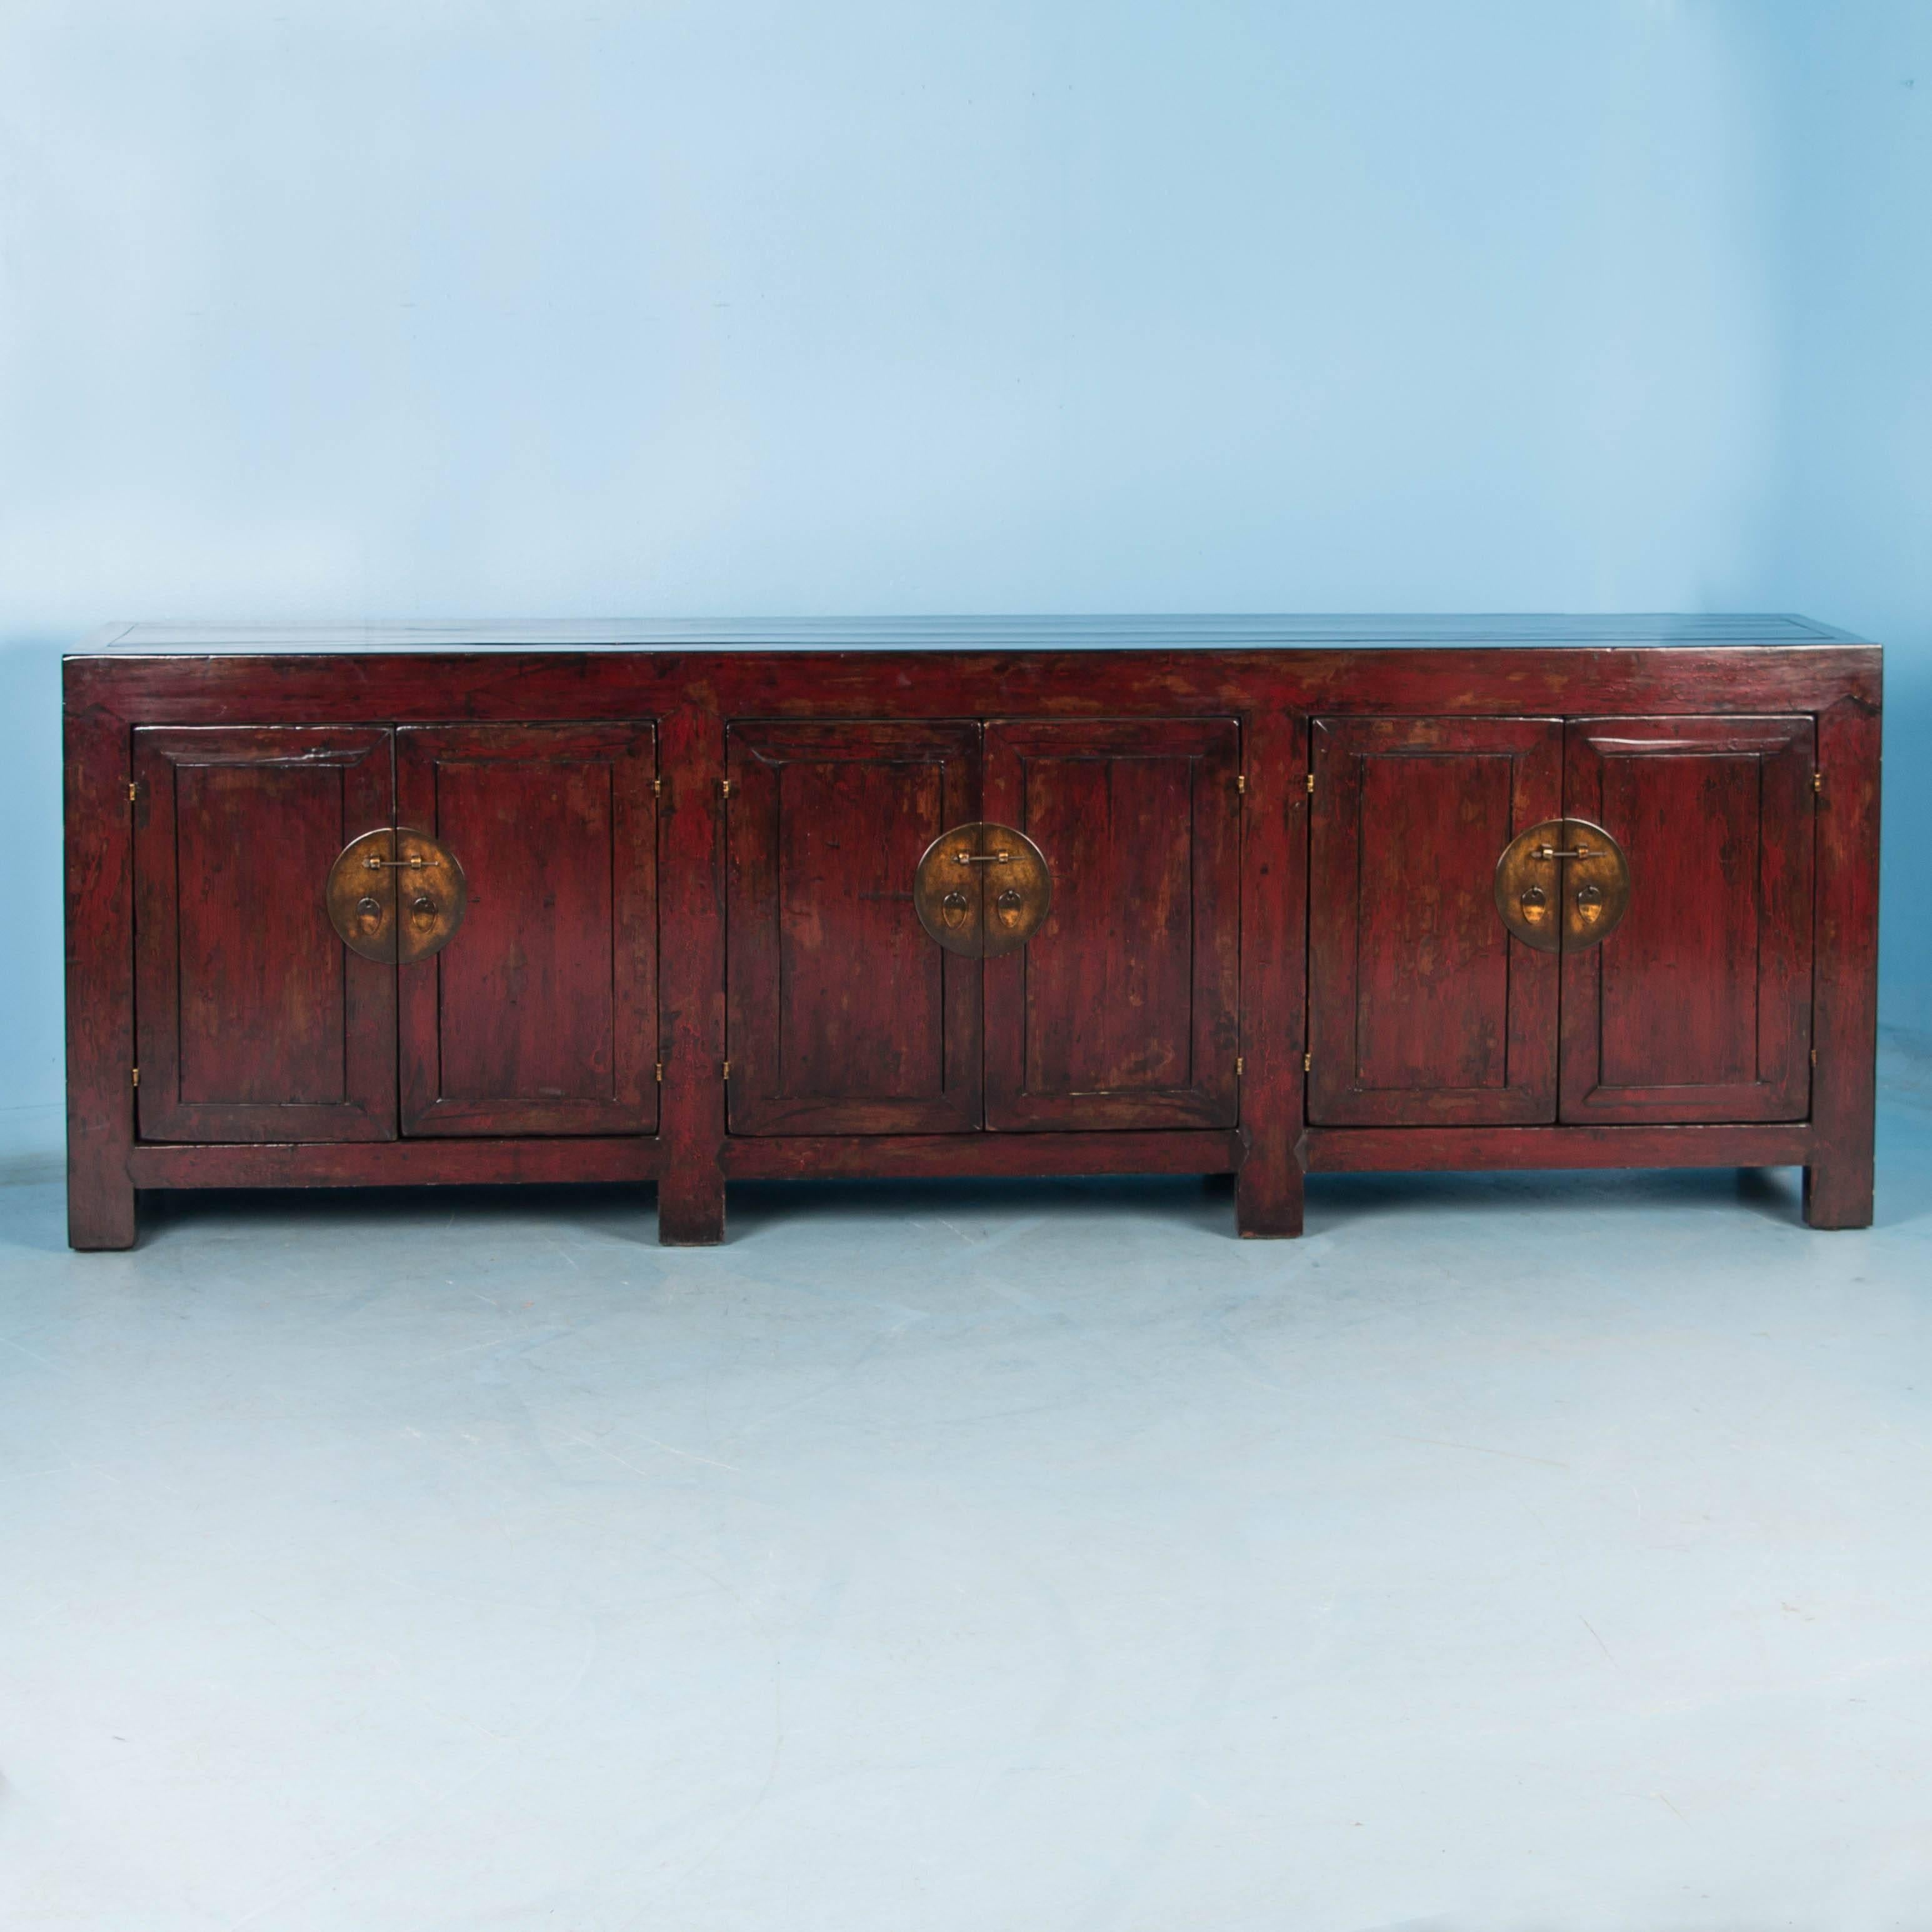 The rich color and finish on this stunning antique Chinese sideboard is a combination of elements. The original red painted finish has been worn down in places to reveal the natural elm wood below. The entire sideboard has a lacquered finish, which